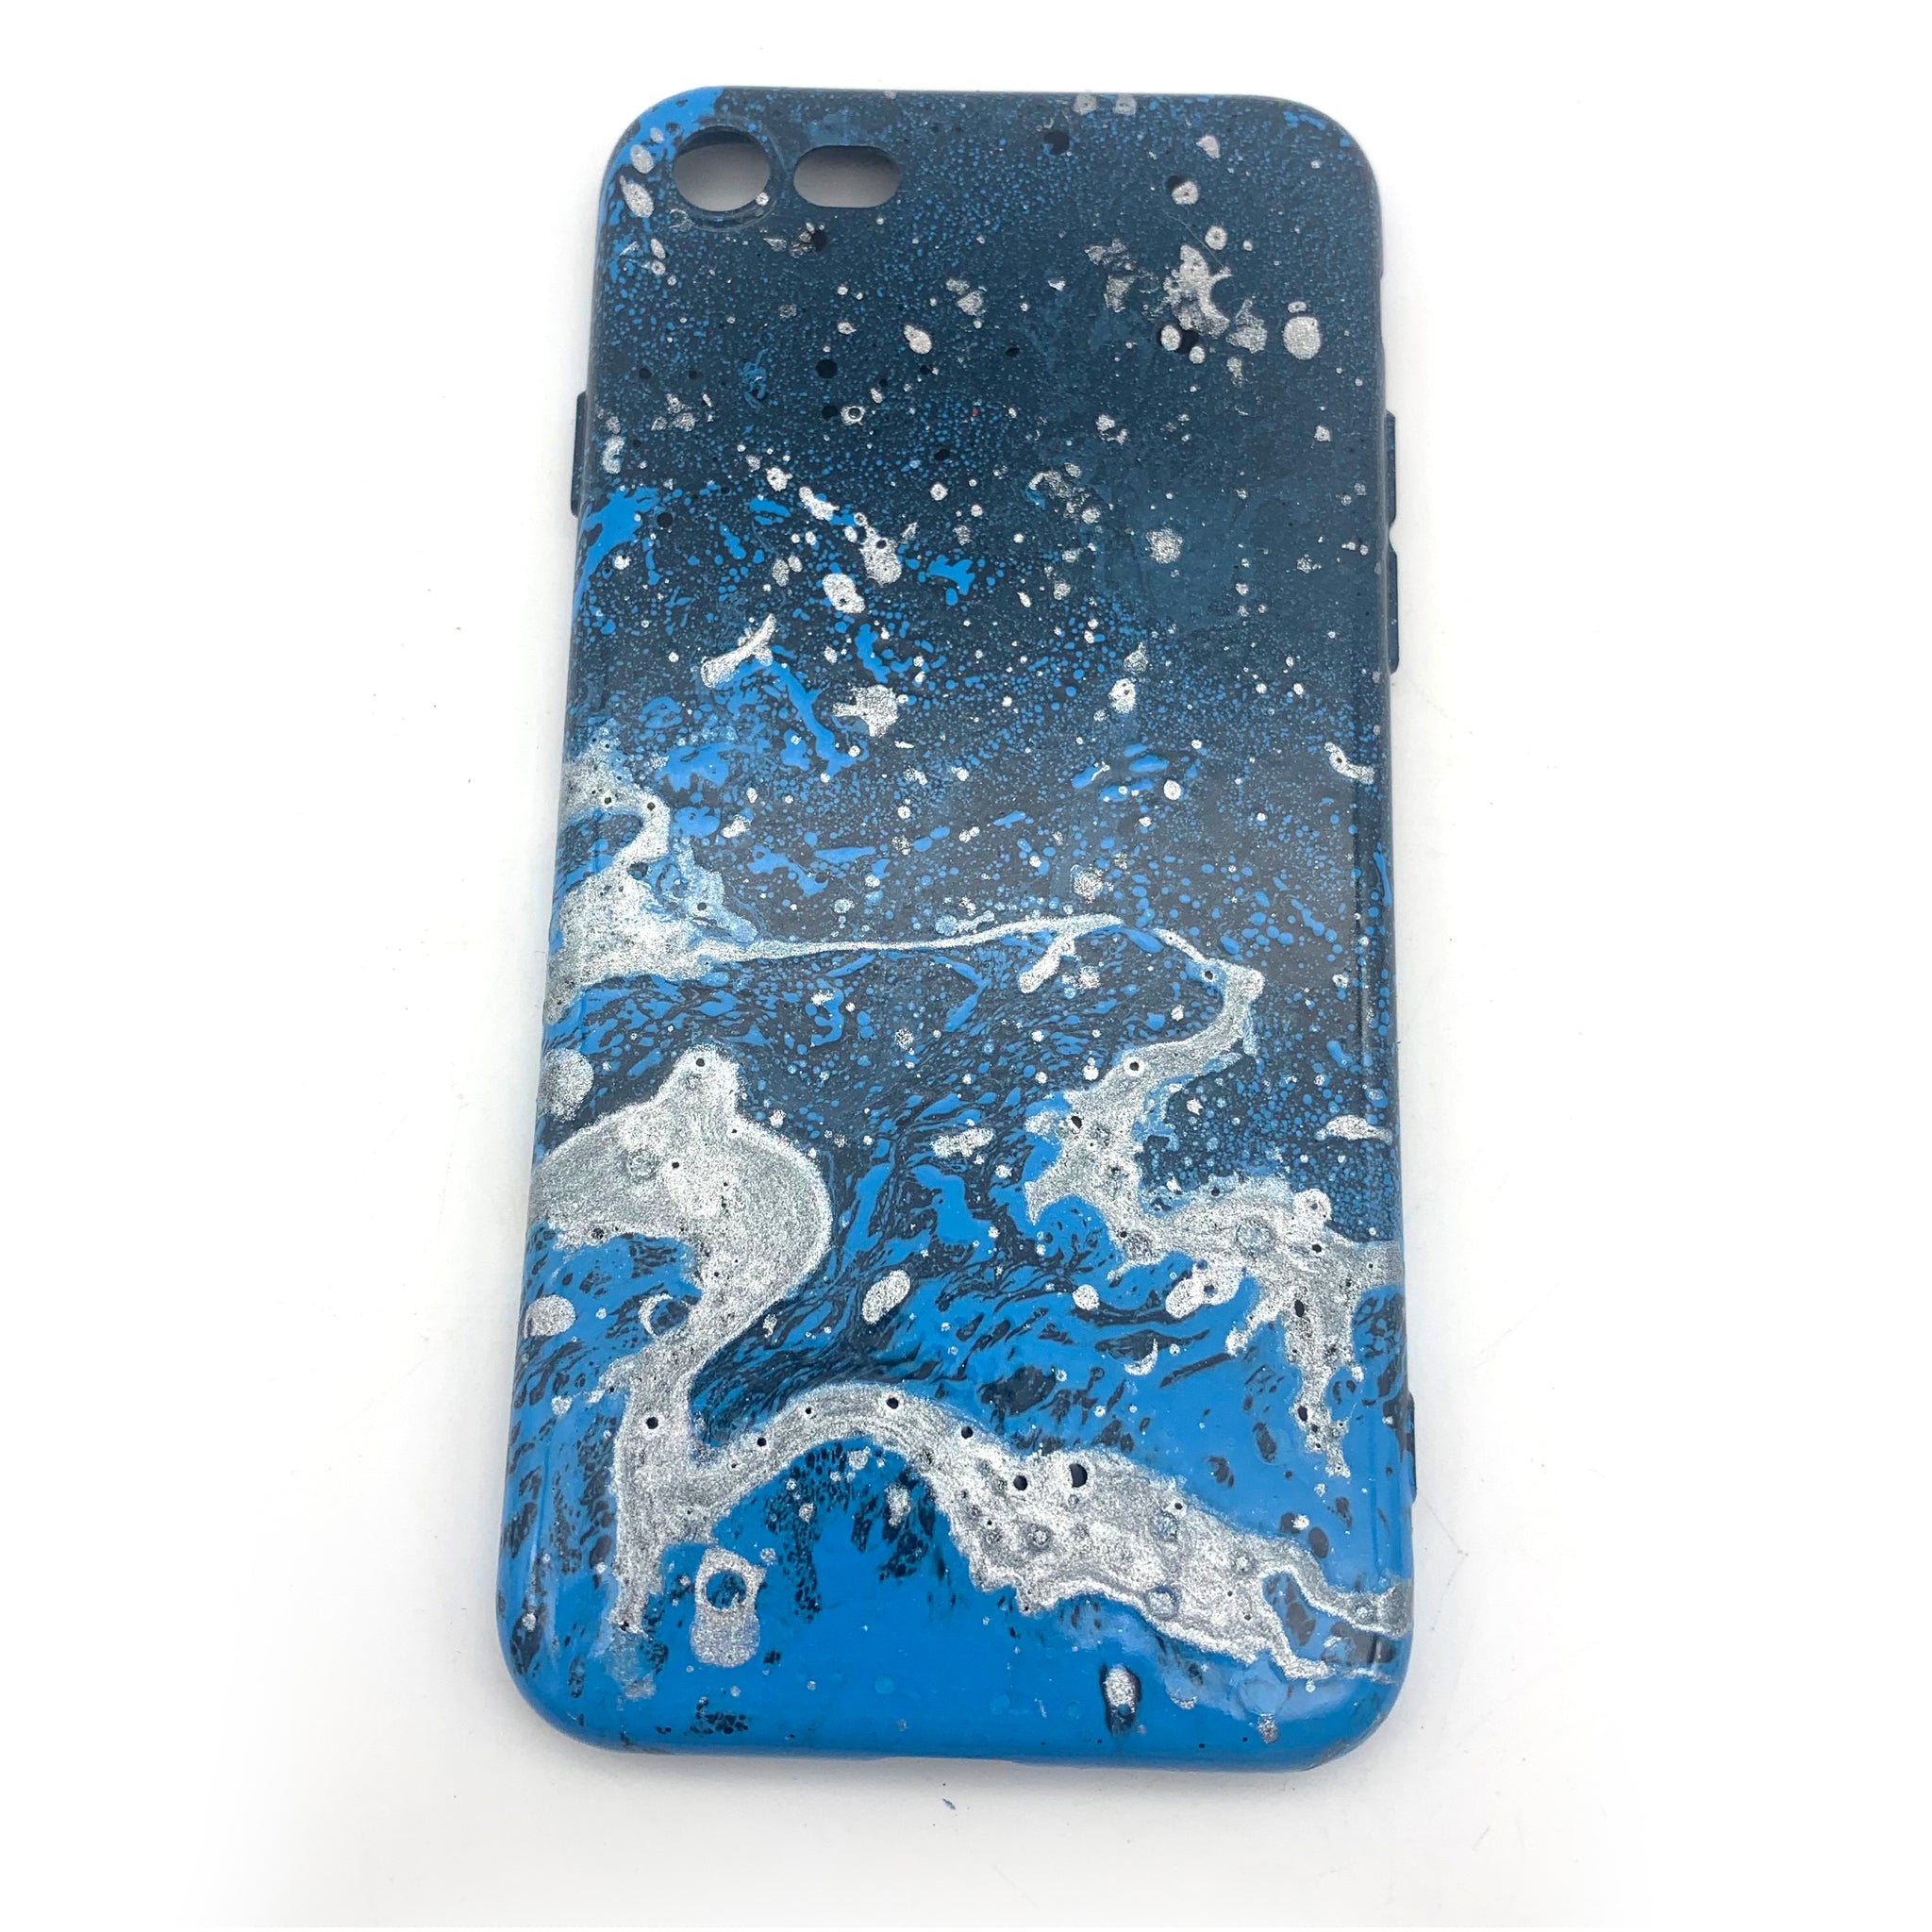 Hydro Dipped Phone Cases in Blue Silver Black and White - iPhone 7, iPhone 8, iPhone SE (2020)